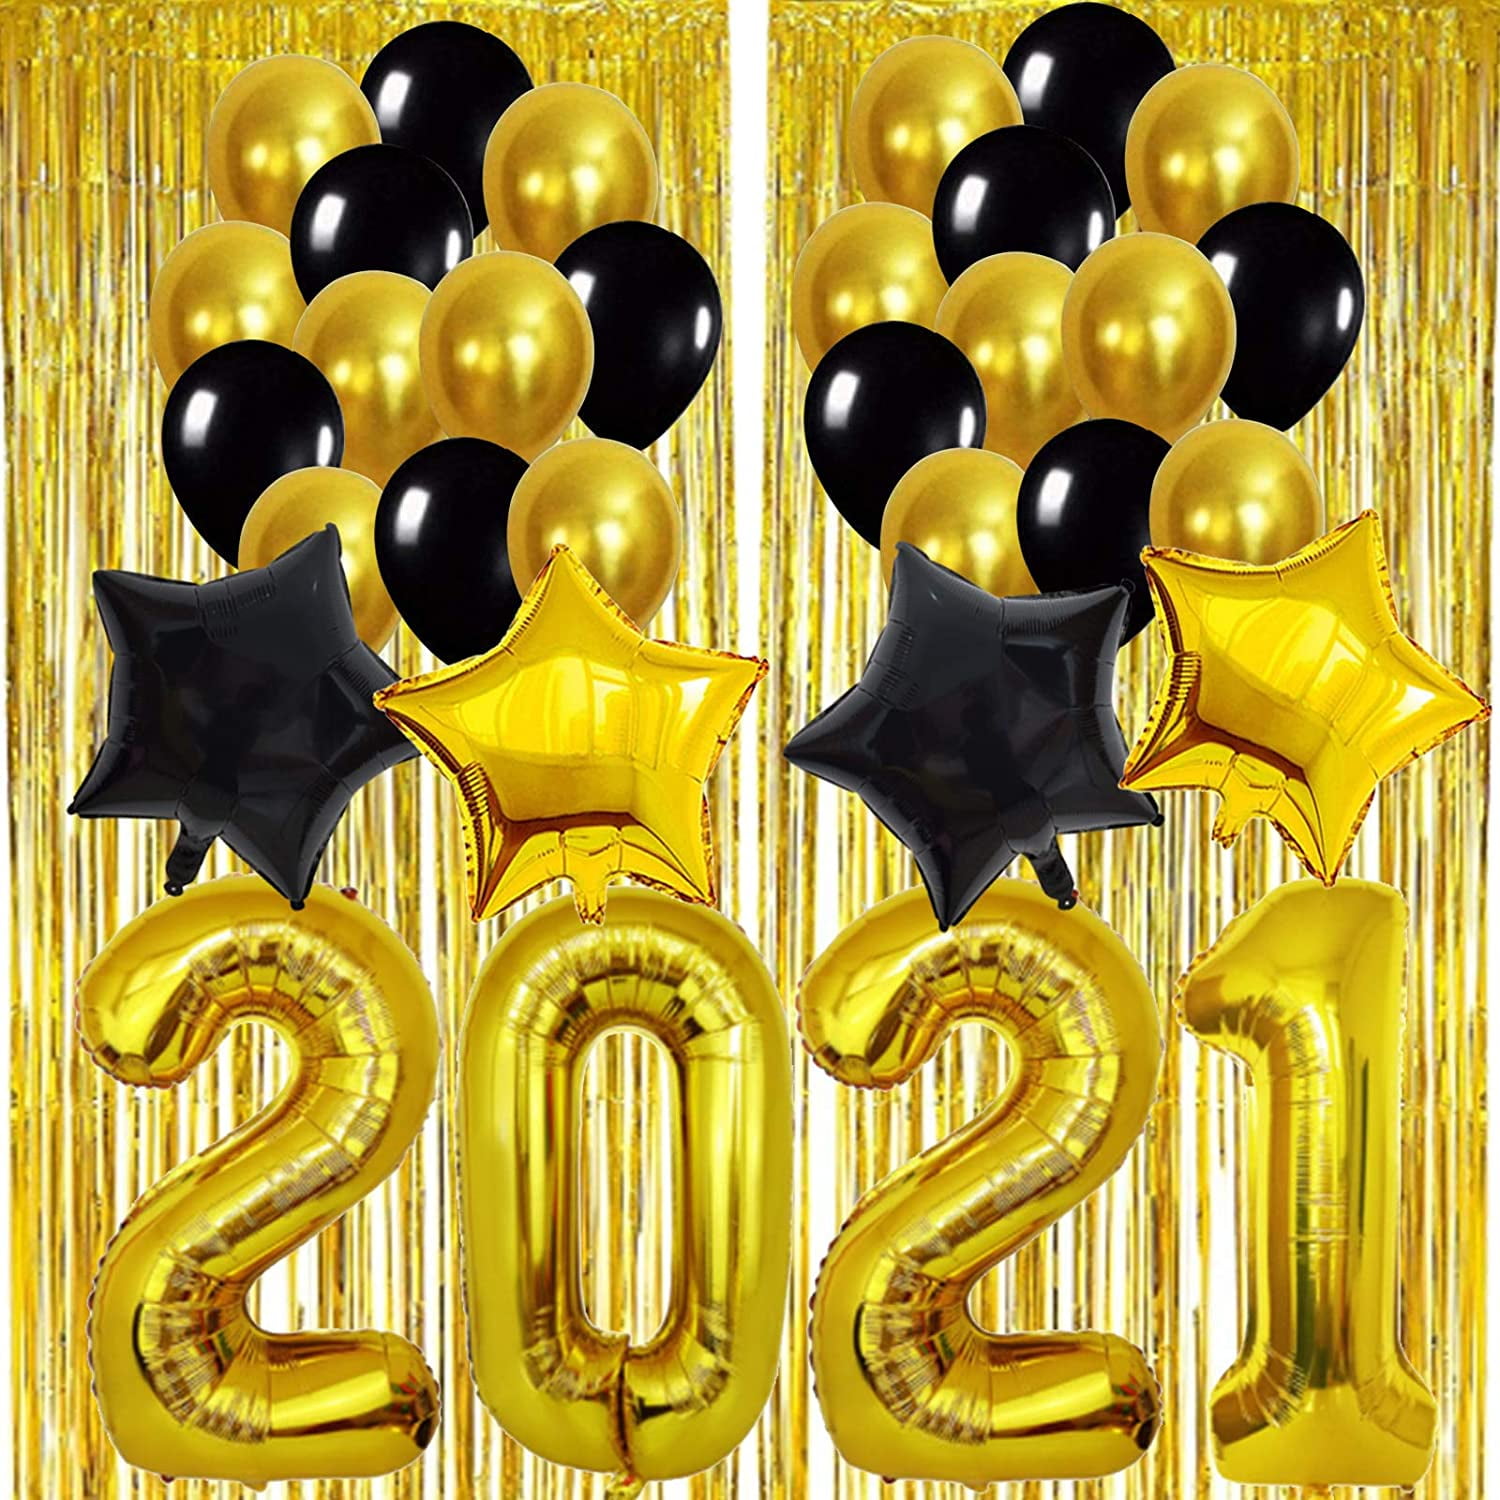 2019 Graduation Party Decorations Black and Gold Congrats Grad Graduation Decorations and Class of 2019 Decorations for Ceiling Shiny Foil Graduation Swirls for Graduation Party Supplies 2019